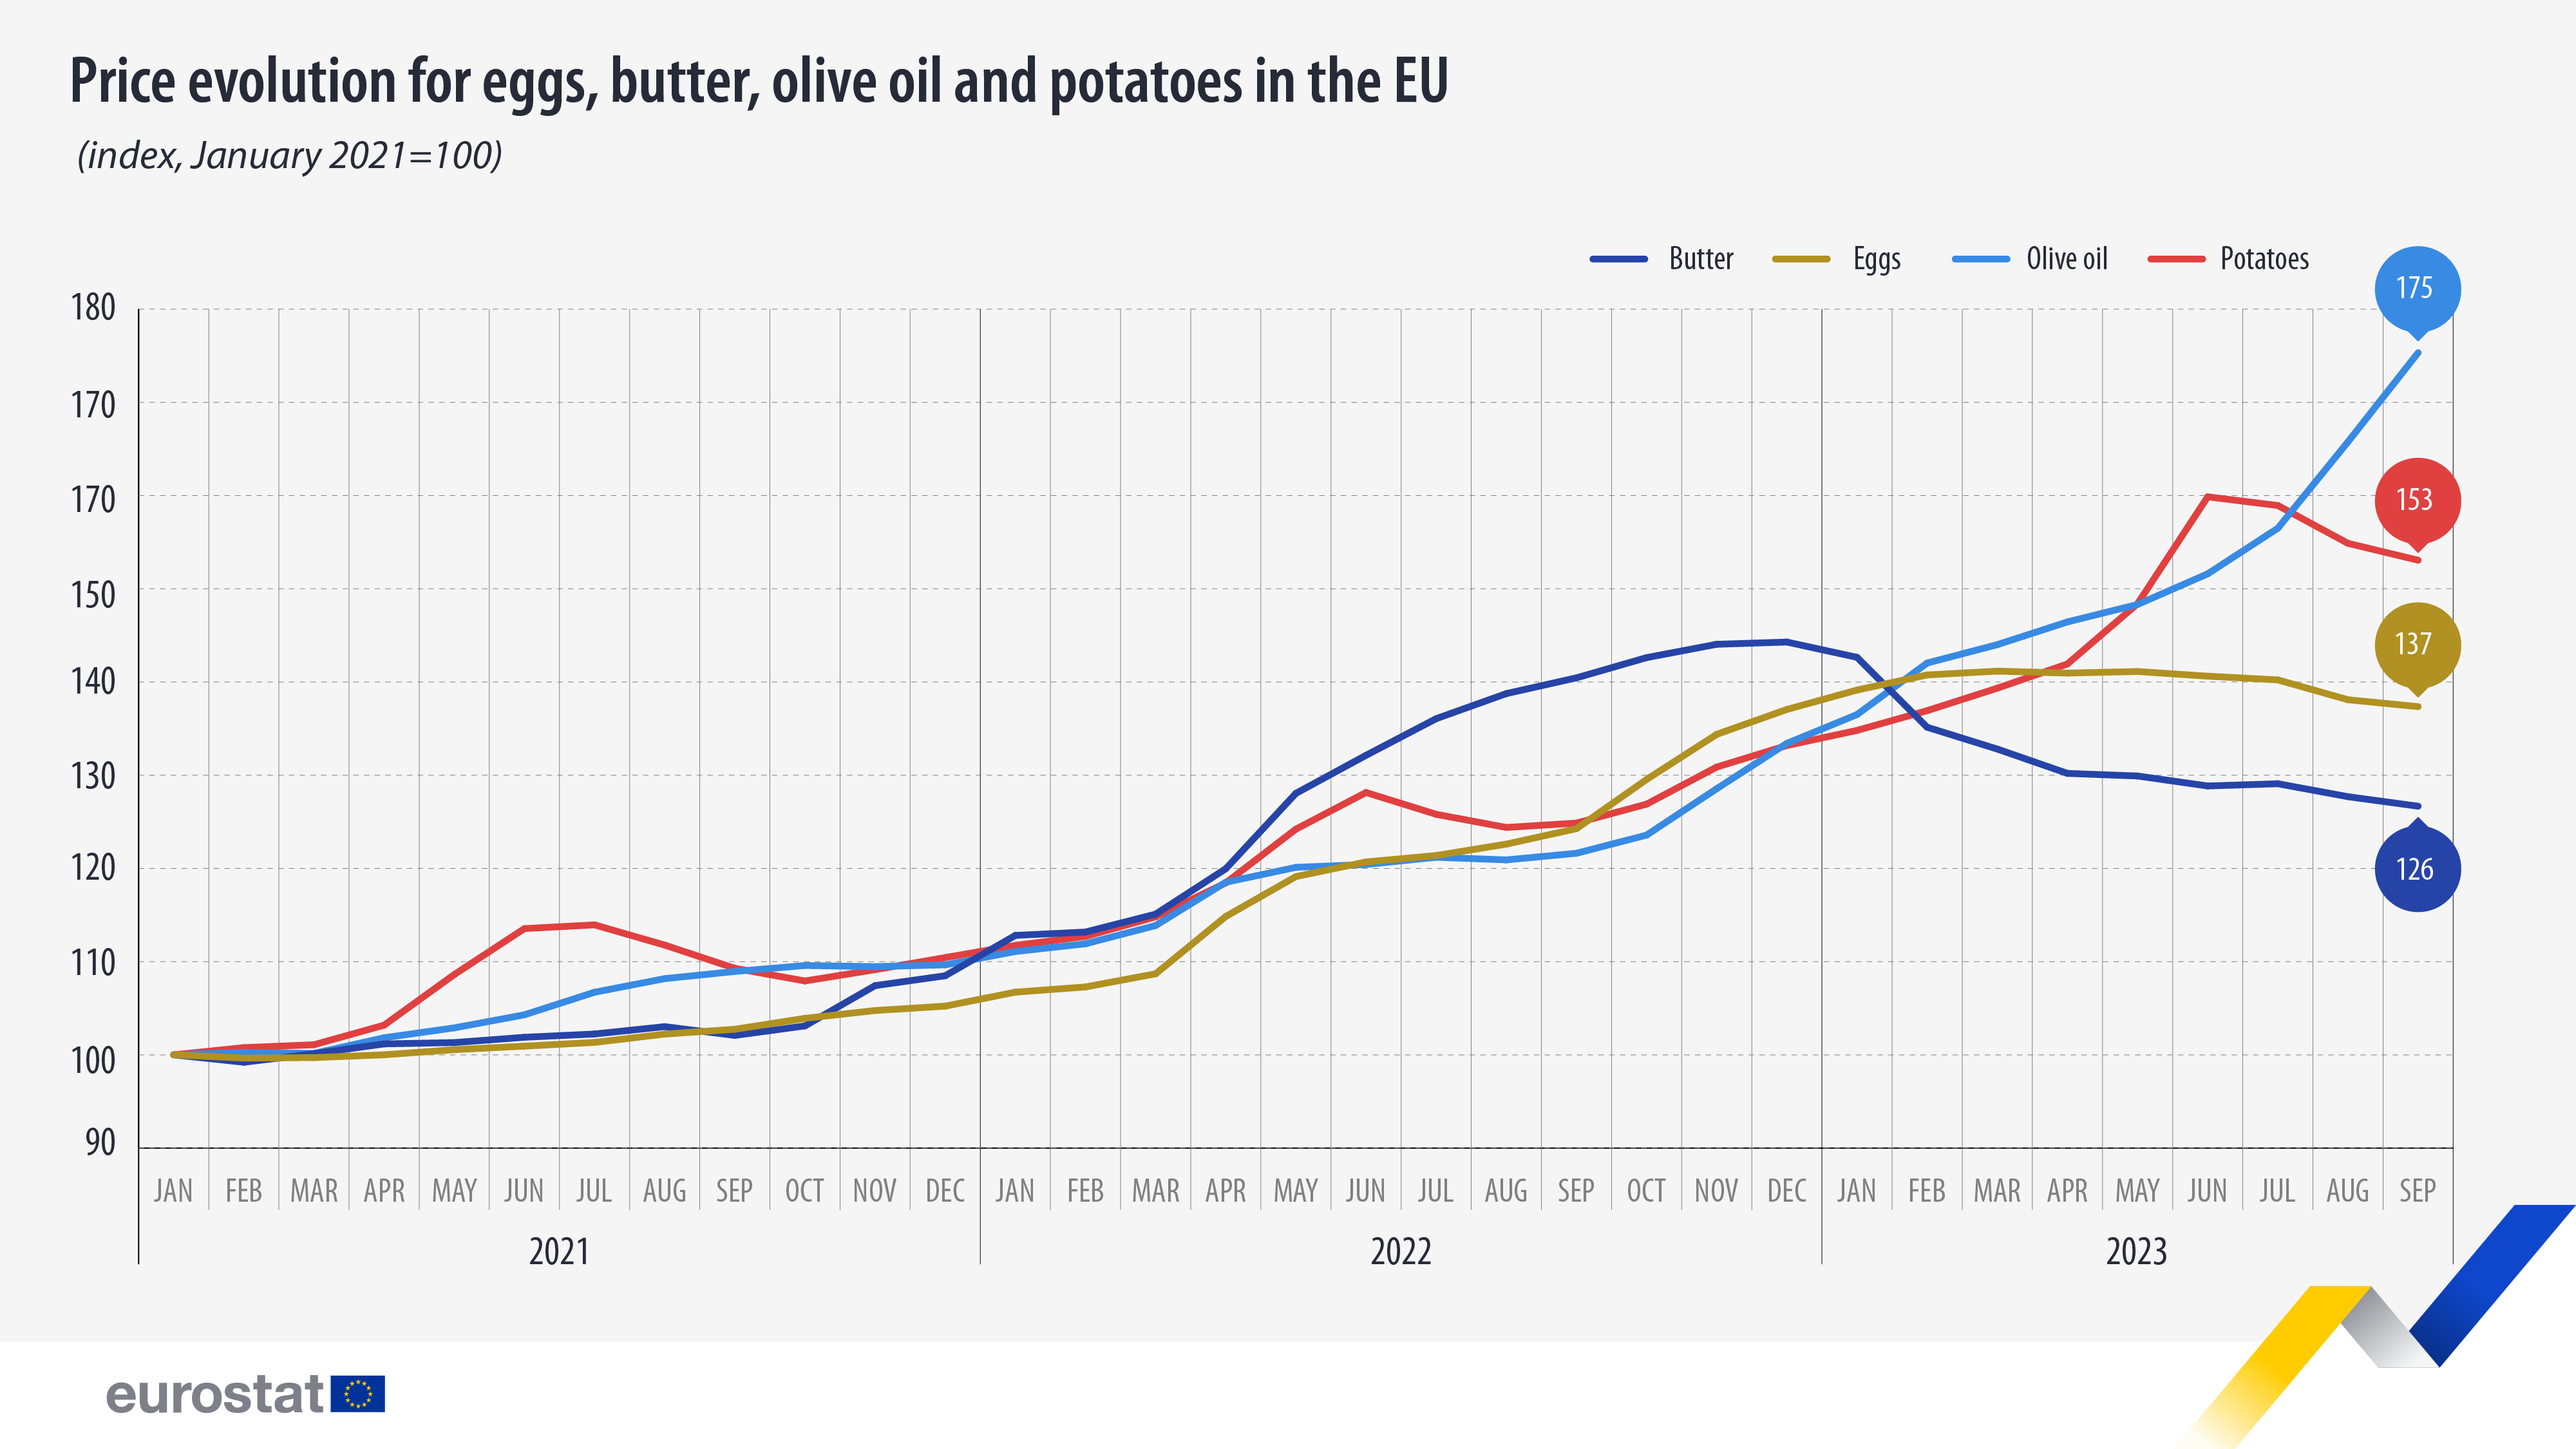 Line graph: Price evolution for eggs, butter, olive oil and potatoes in the EU, index January 2021=100